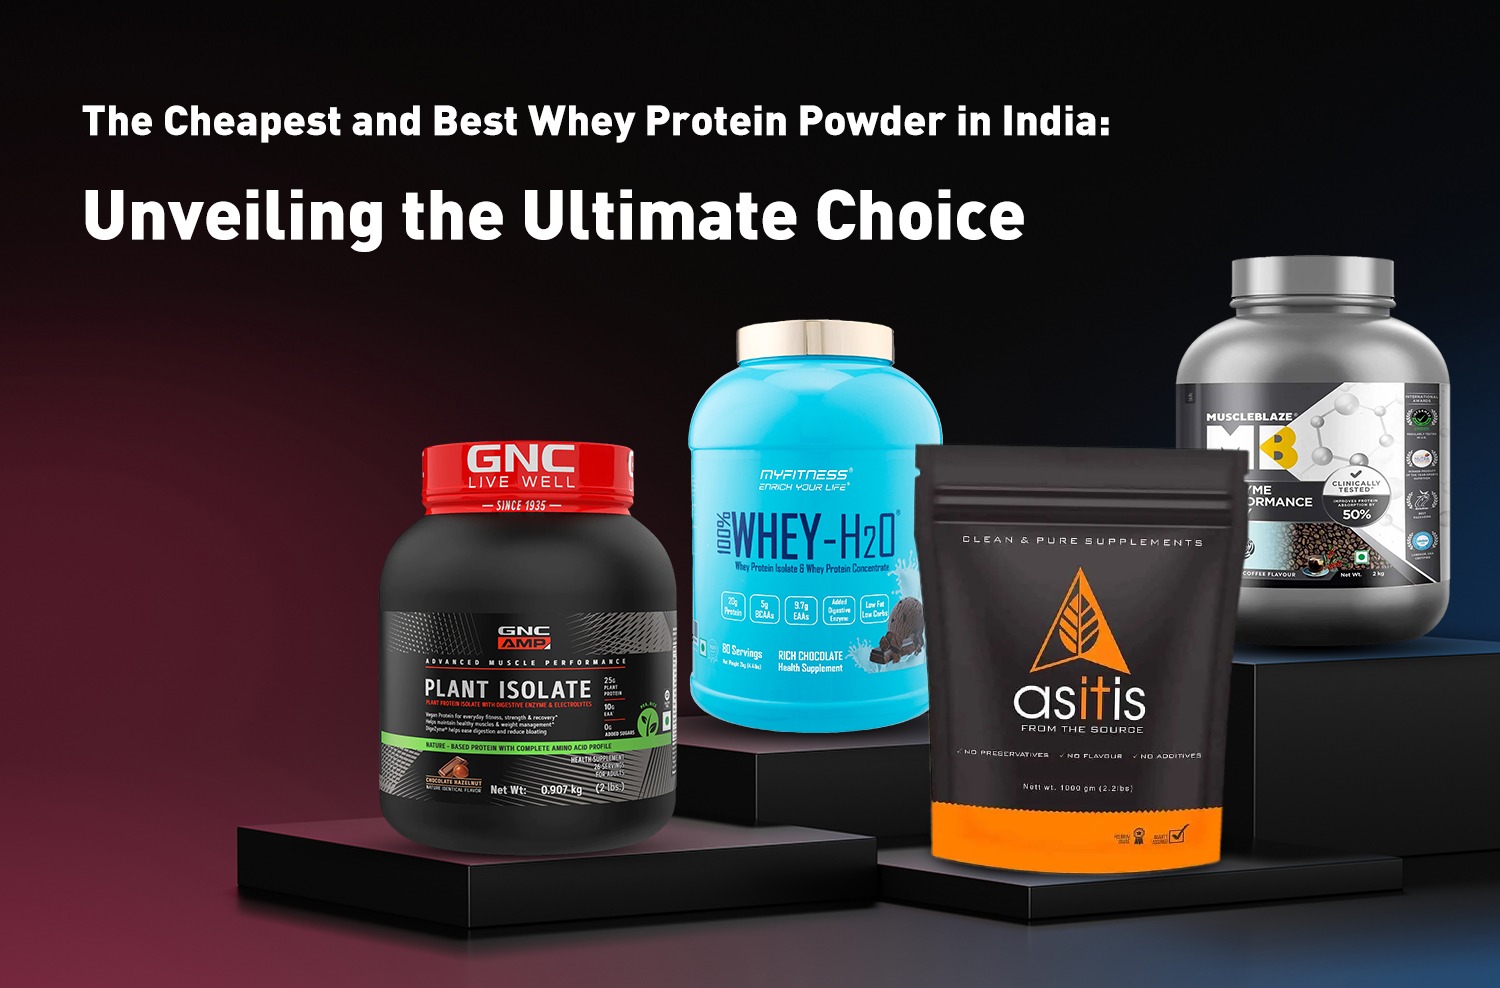 The Cheapest and Best Whey Protein Powder in India